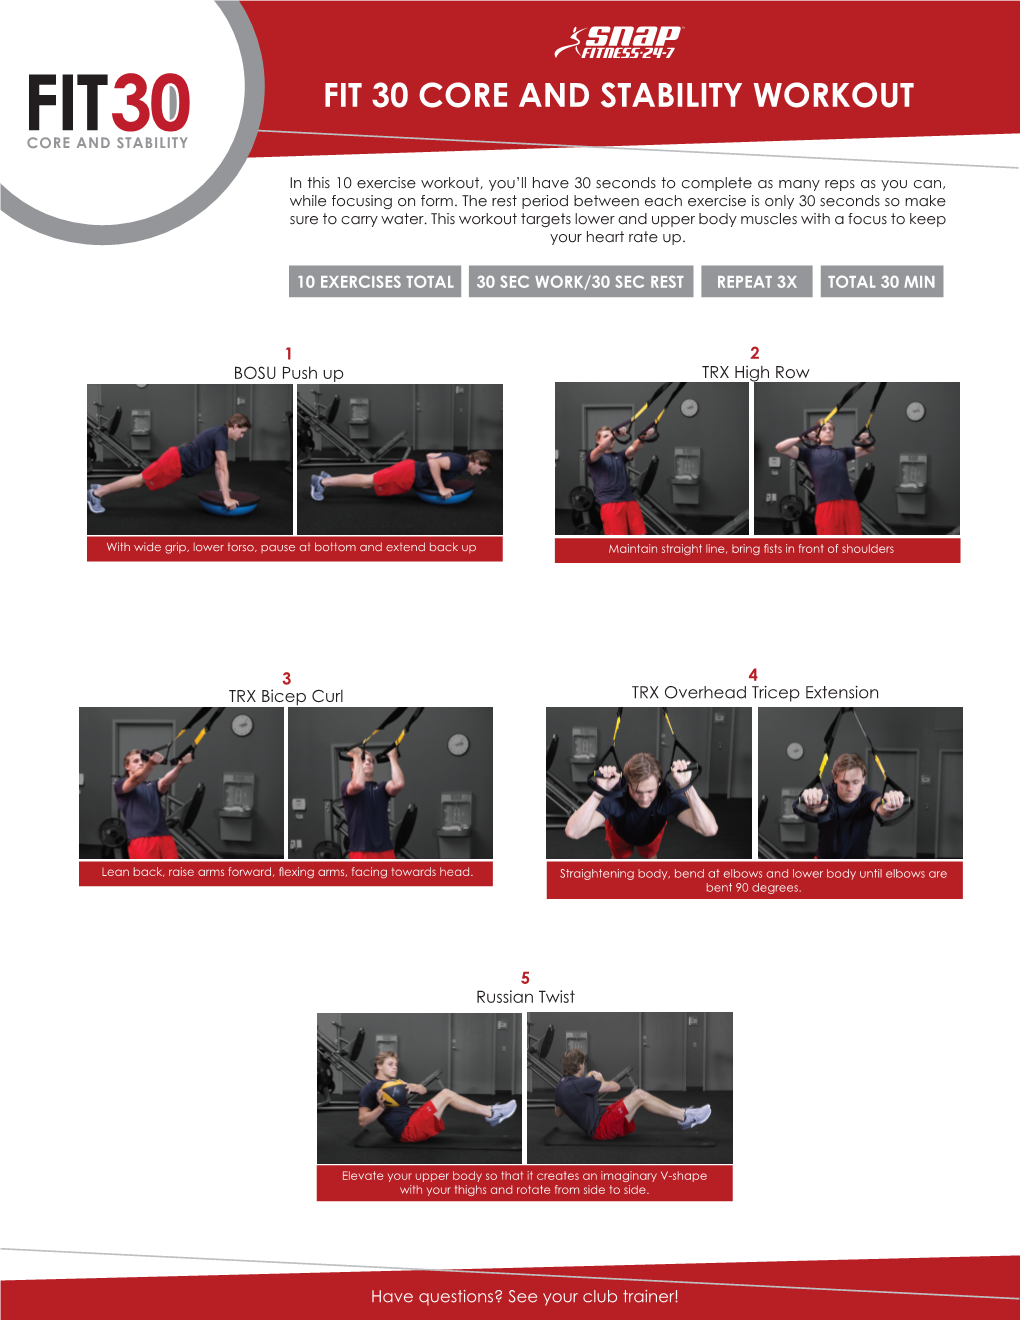 Fit 30 Core and Stability Workout